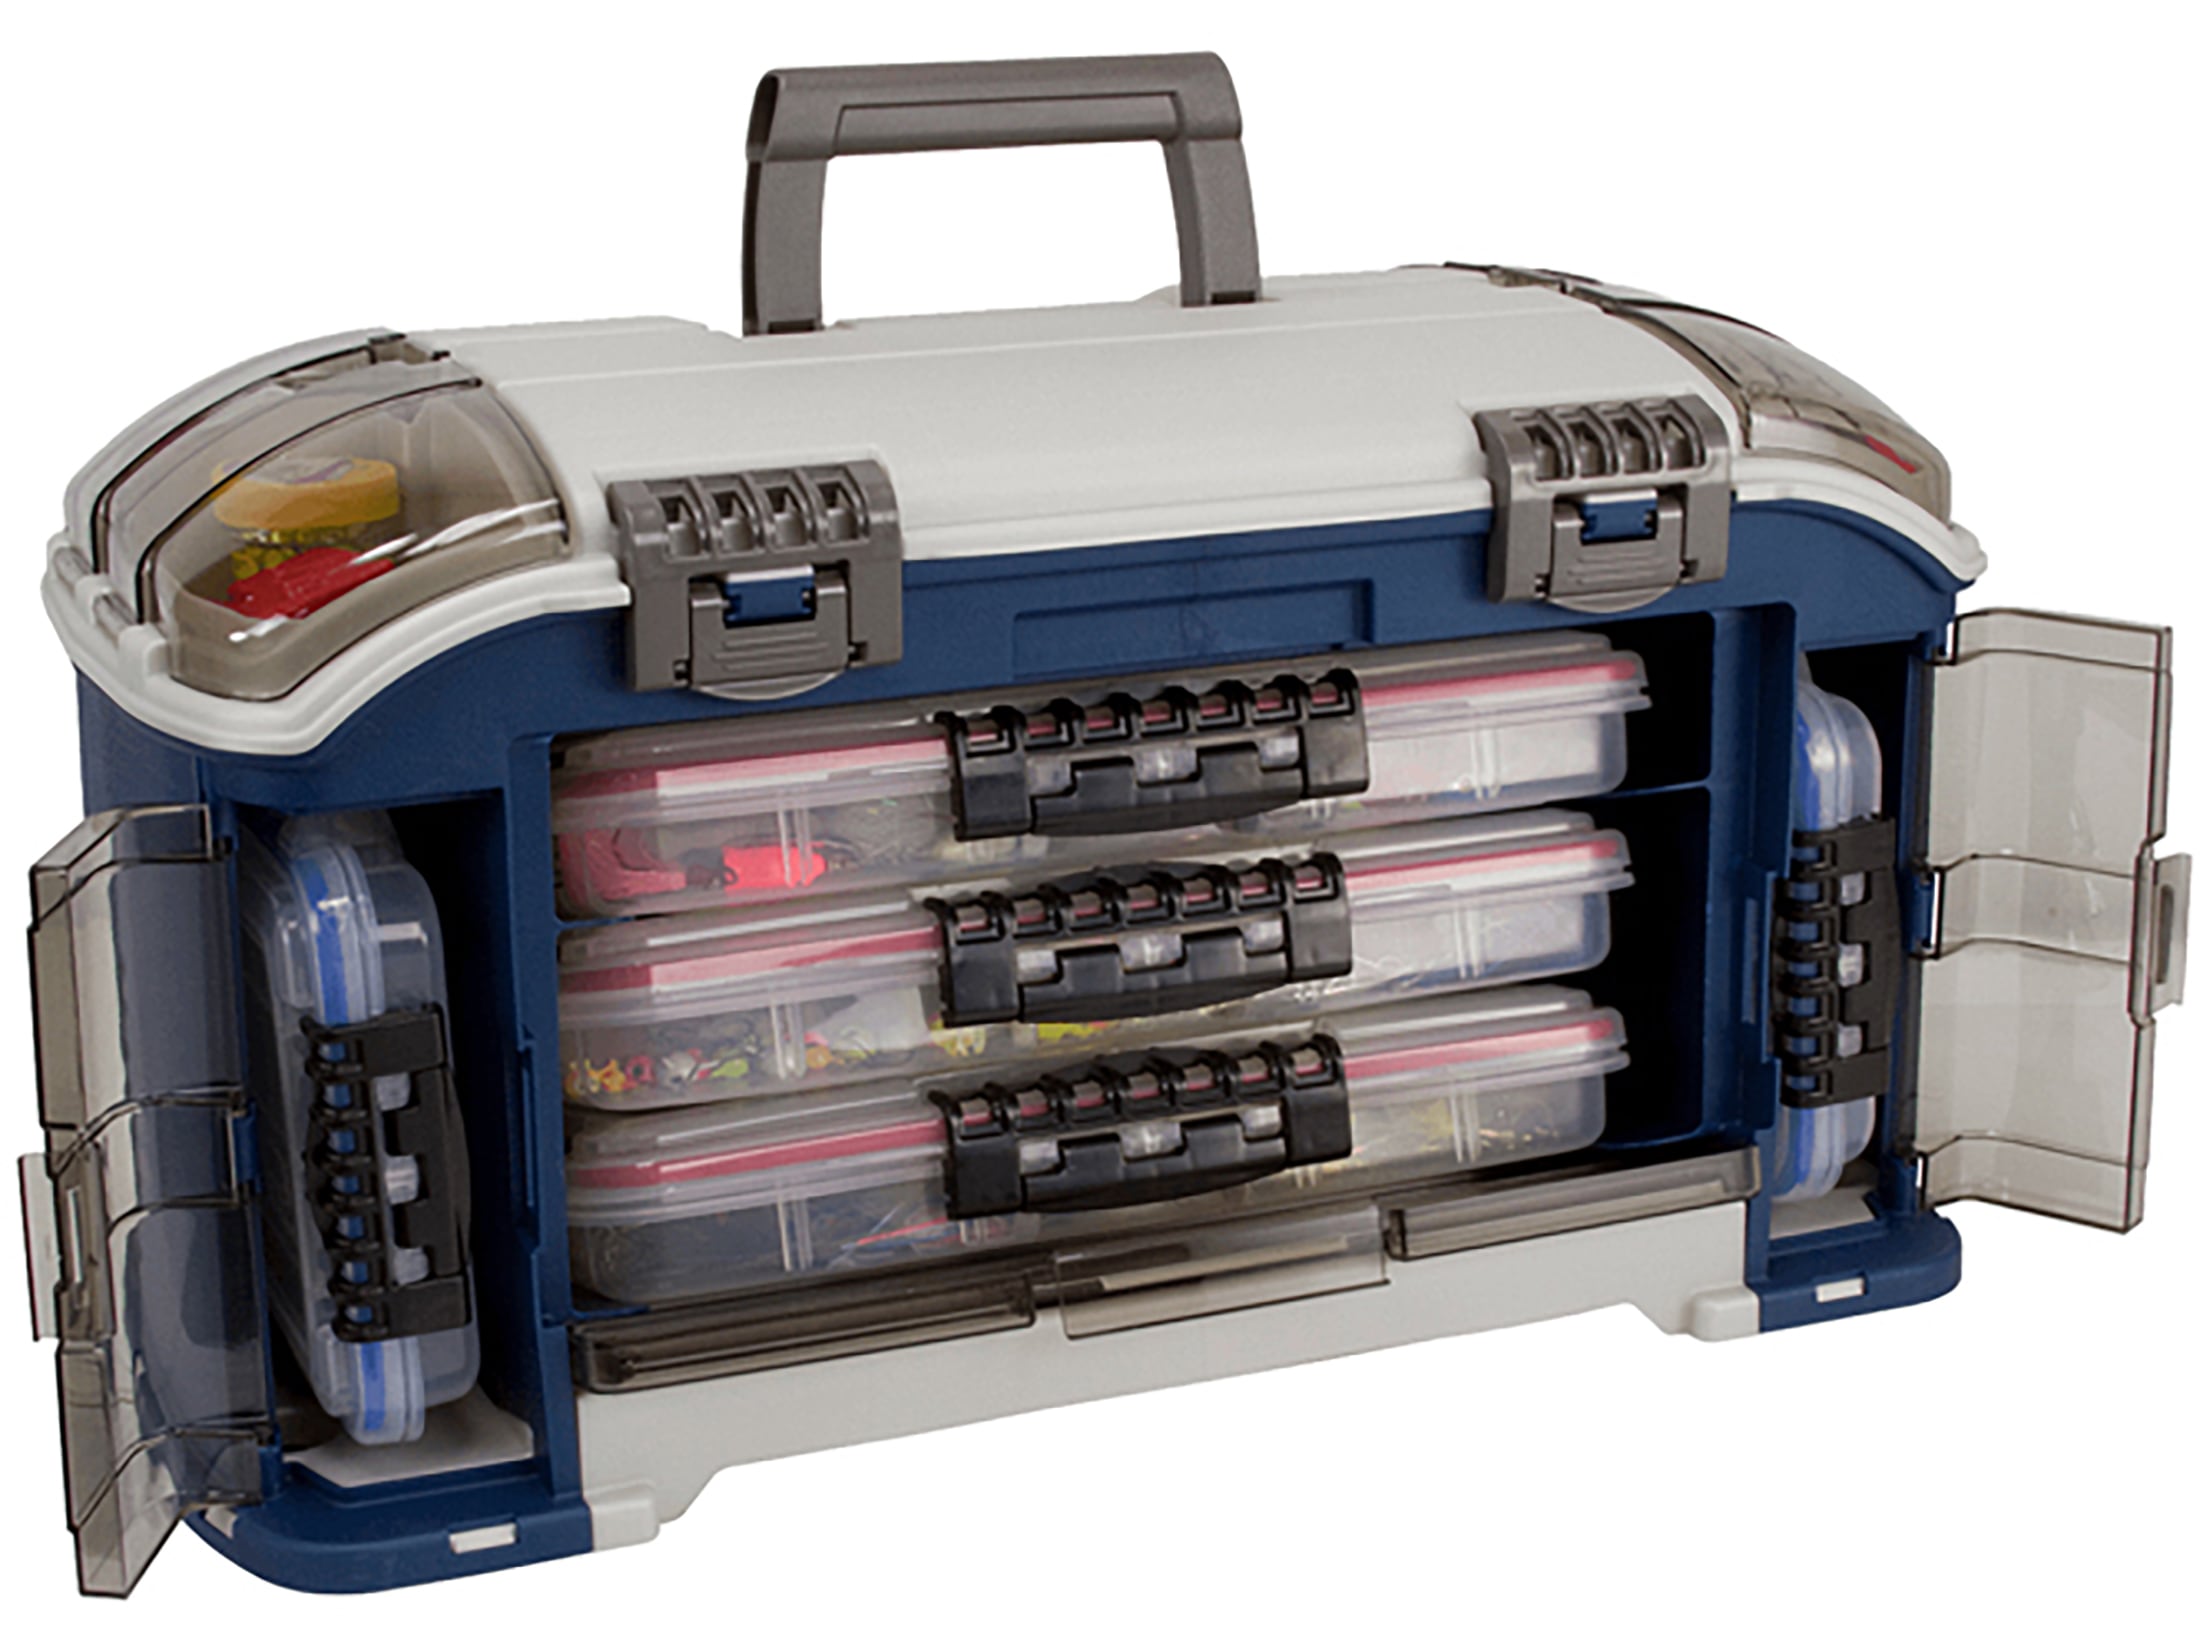 Plano Elite Series 3700 Angled Tackle Box System